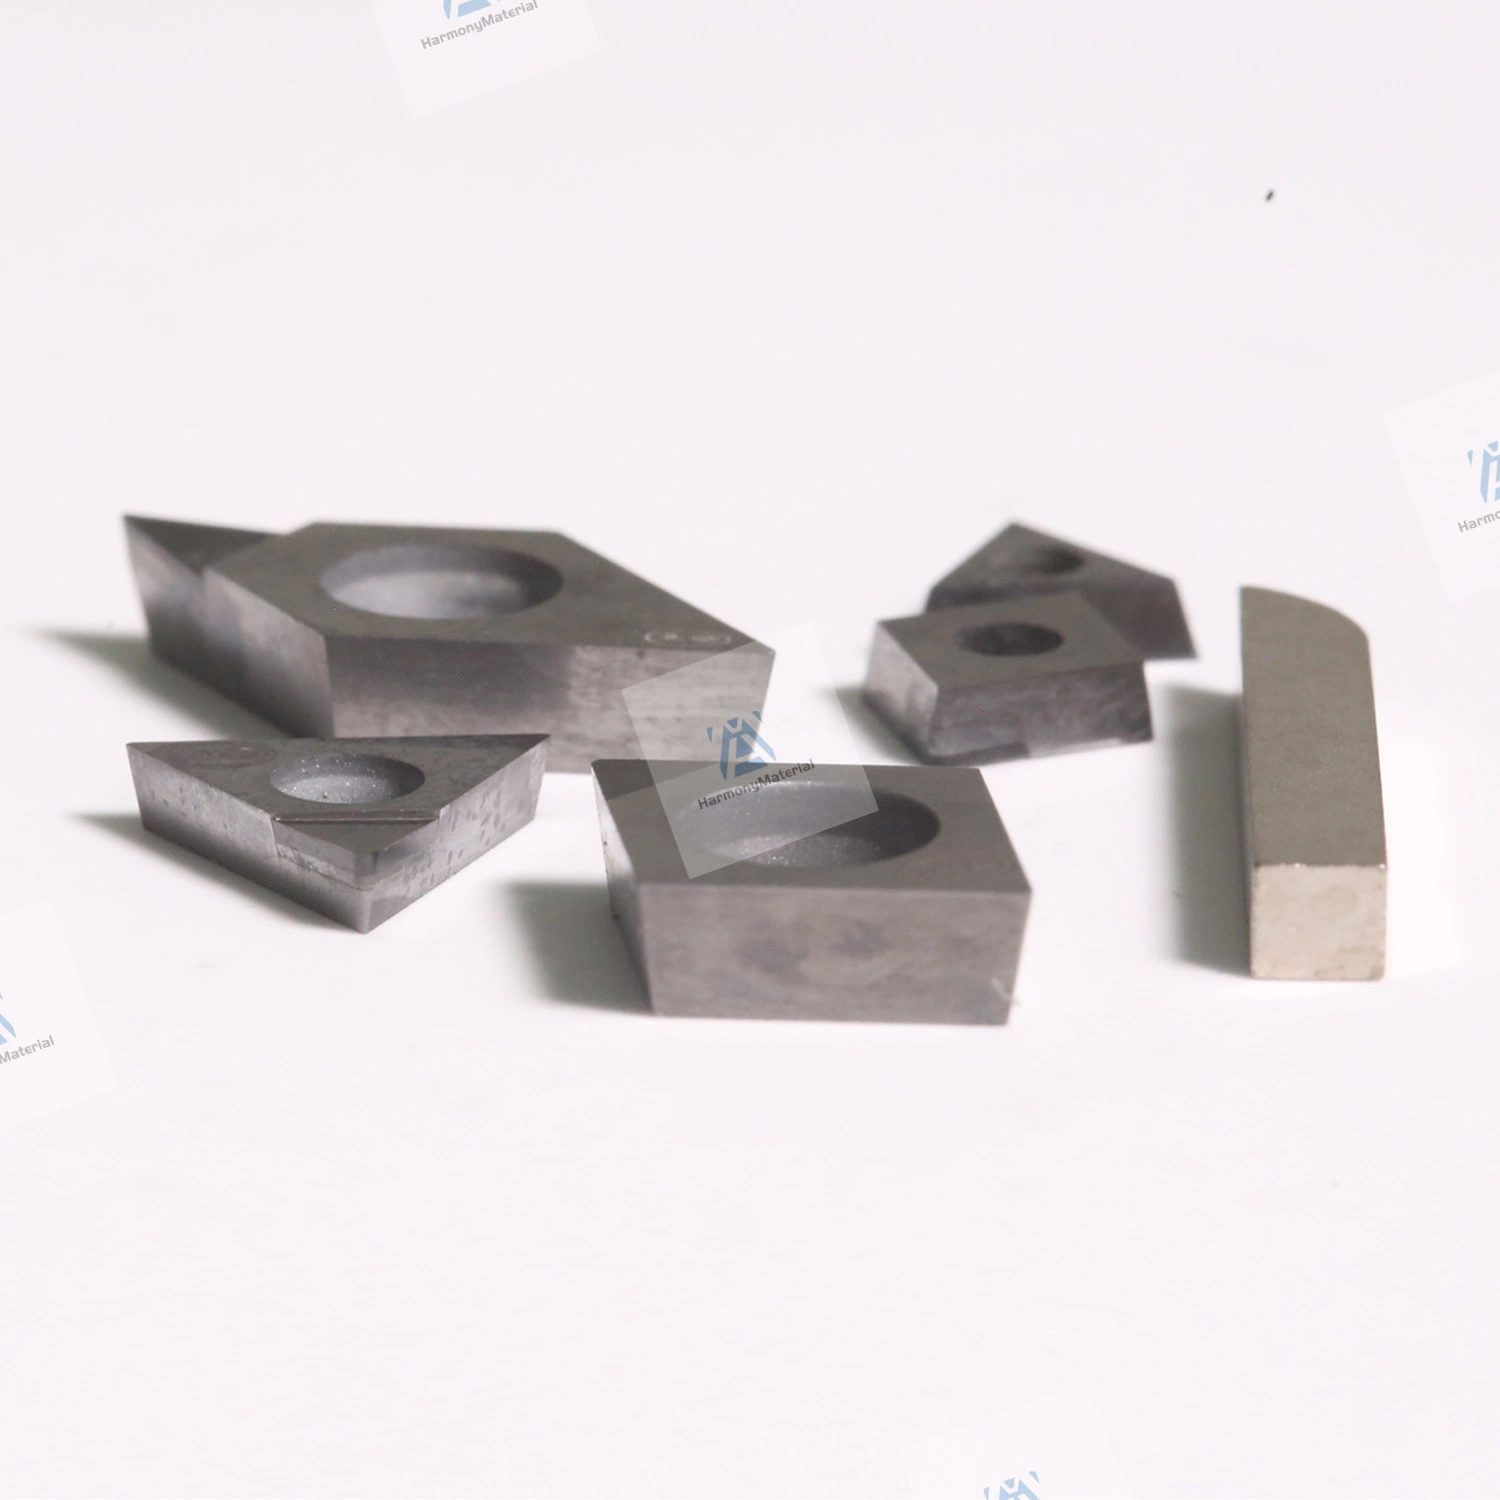 Tungsten Carbide Turning/Milling/Threading/Grooving/Drilling Wnmg Vnmg Sp300 Machine CNC Insert Carbide Cutting Tool